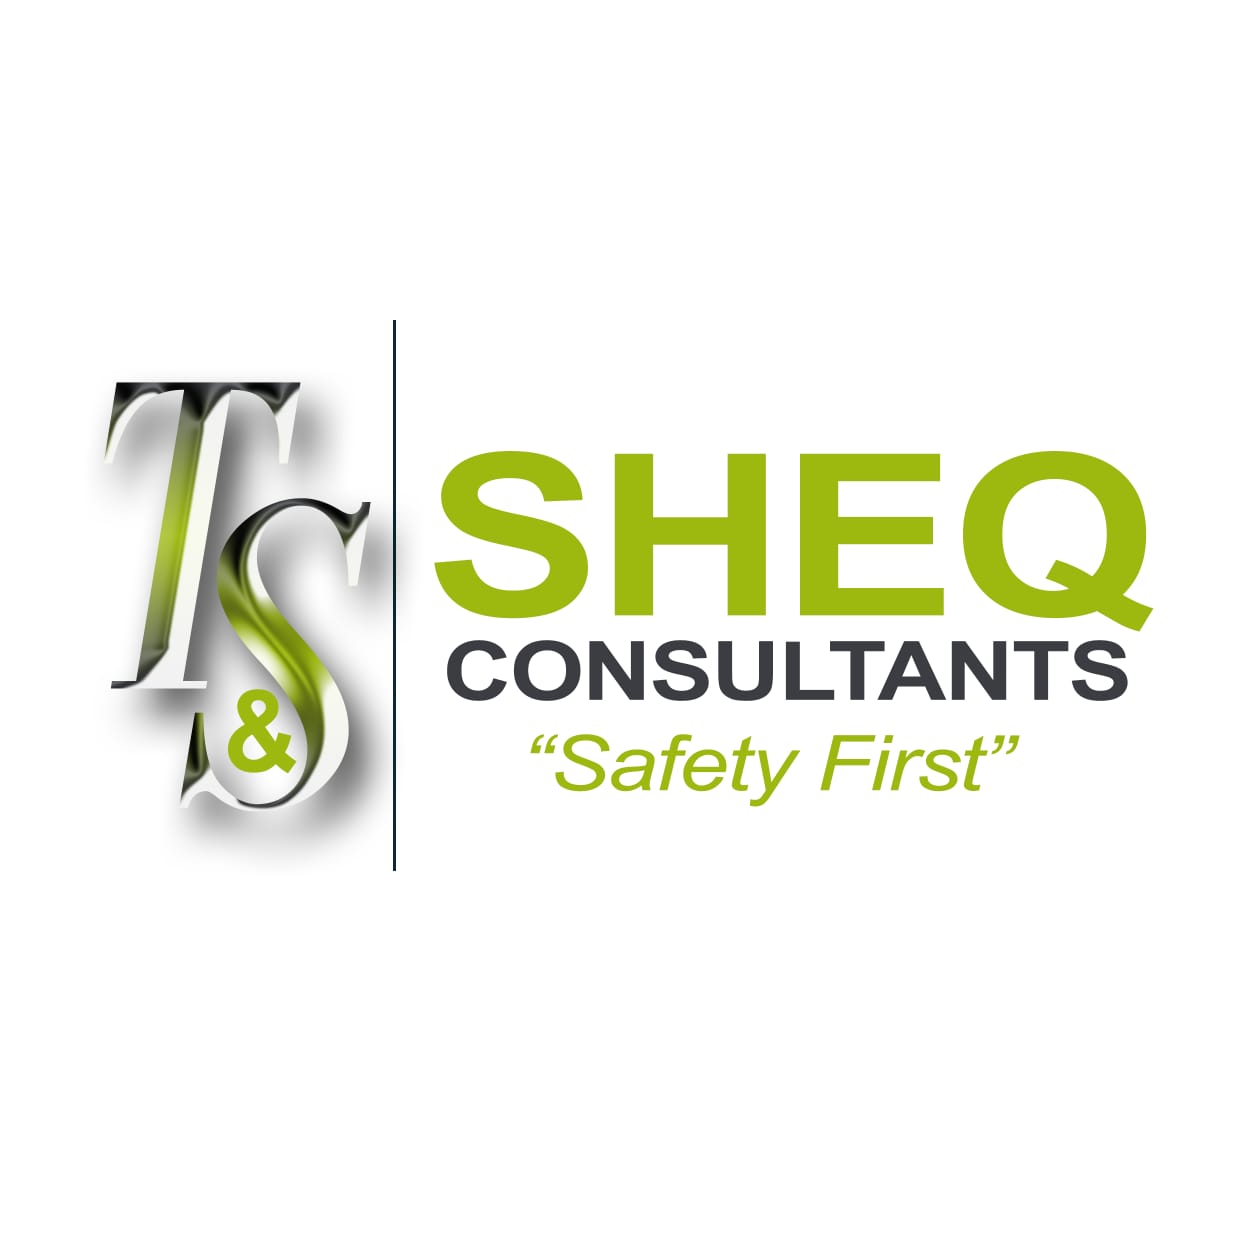 T and S Sheq Consultants